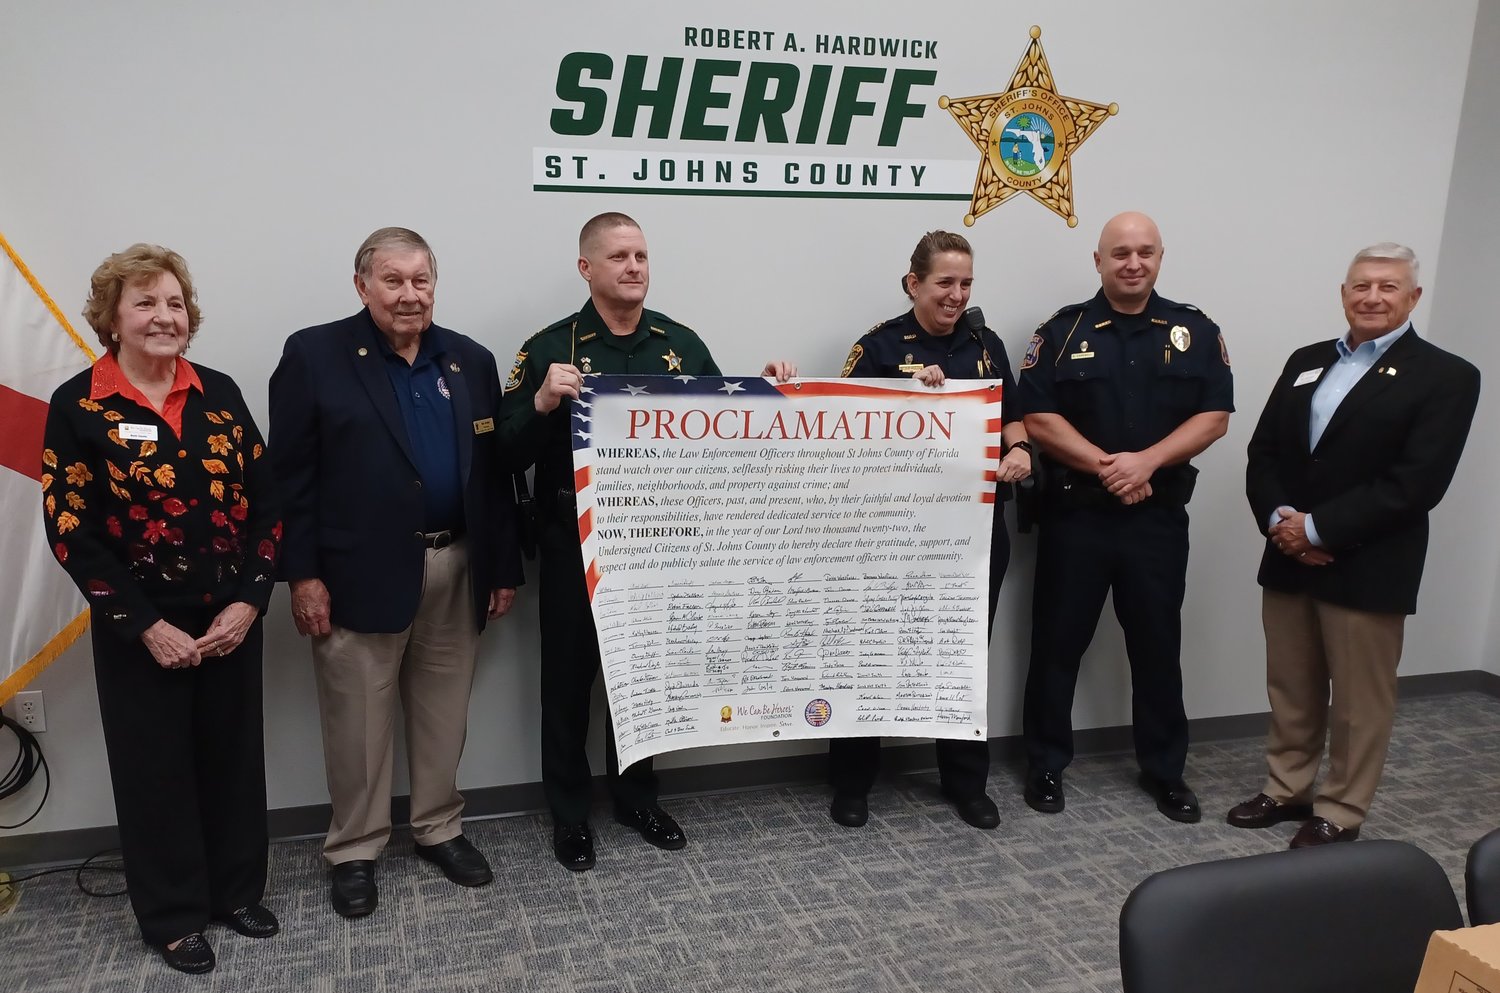 Pictured with the banner from left: We Can Be Heroes Foundation President Beth Heath, Veterans Council of St. Johns County Chair Bill Dudley, St. Johns County Sheriff Robert Hardwick, St. Augustine Police Chief Jennifer Michaux, St. Augustine Beach Police Chief Daniel Carswell, foundation officer Ron Birchall.